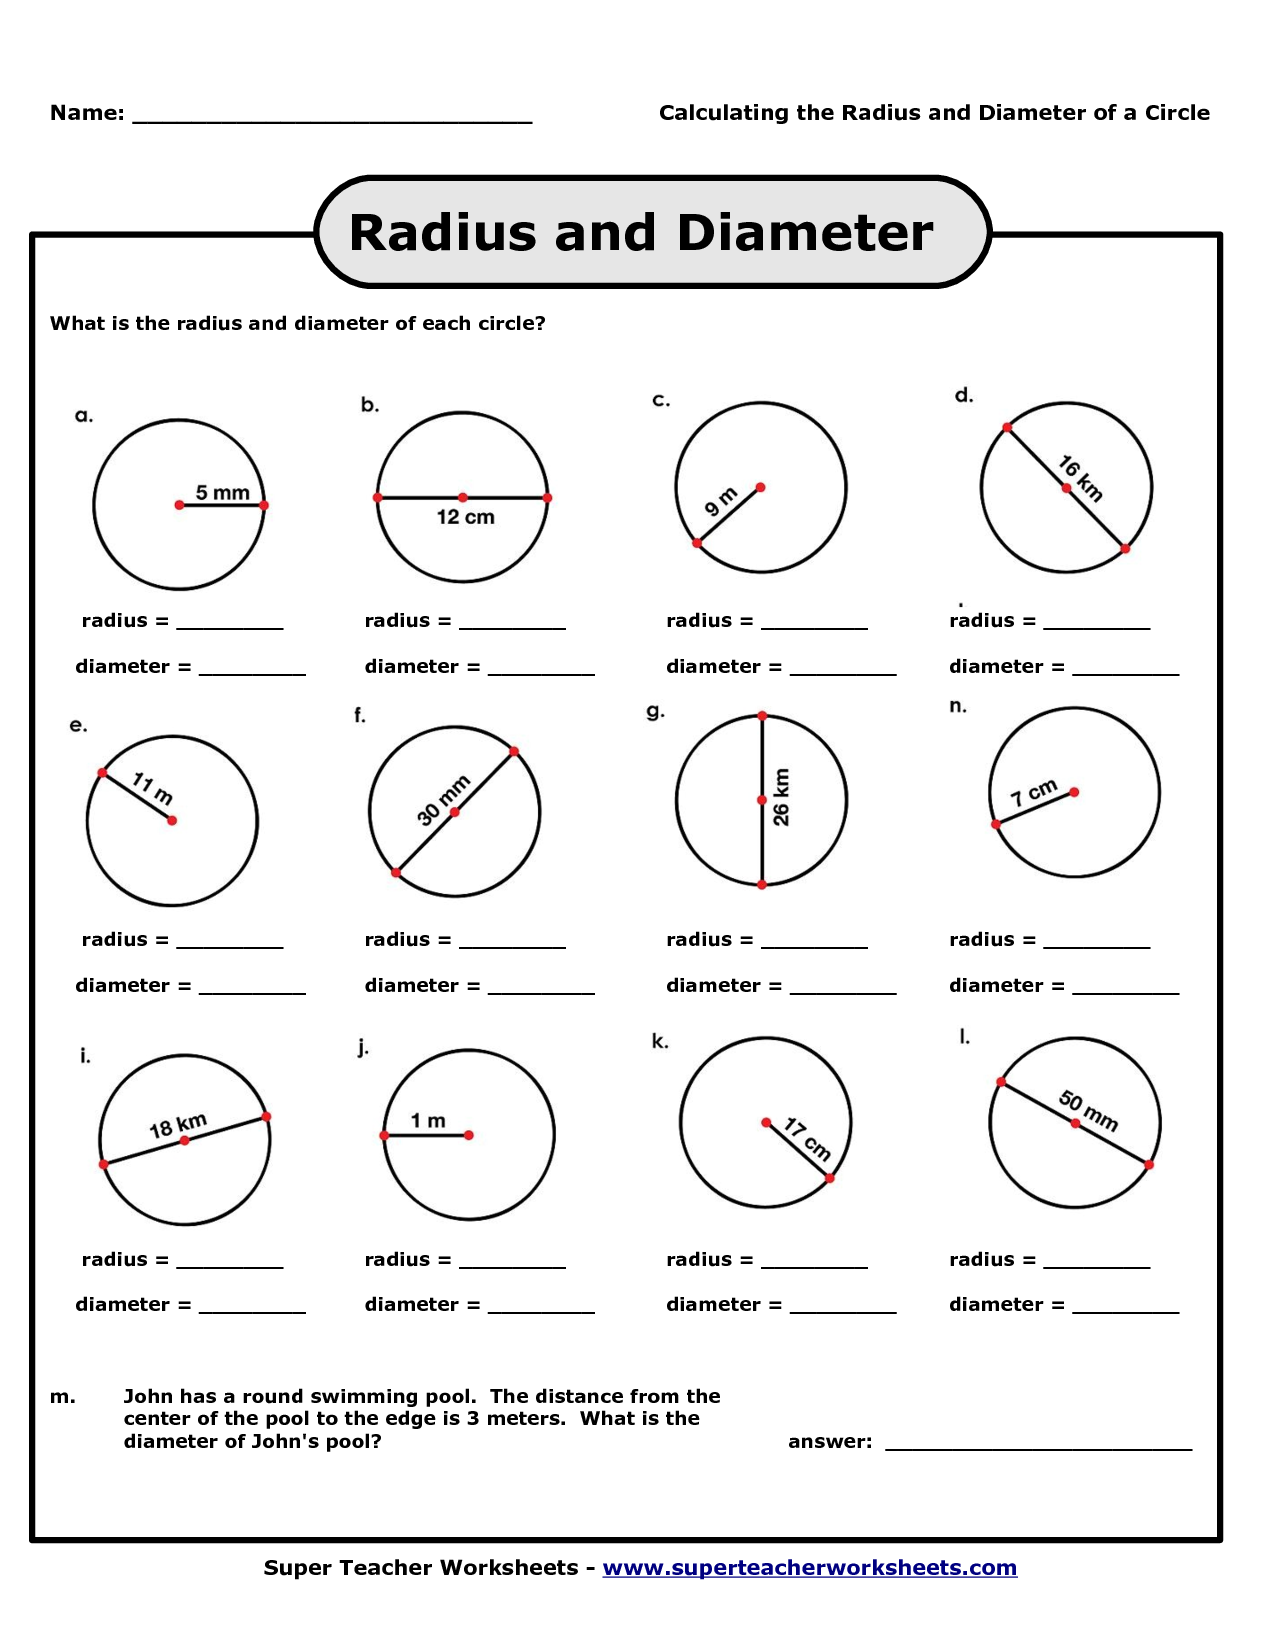 calculate-circumference-and-area-of-circles-a